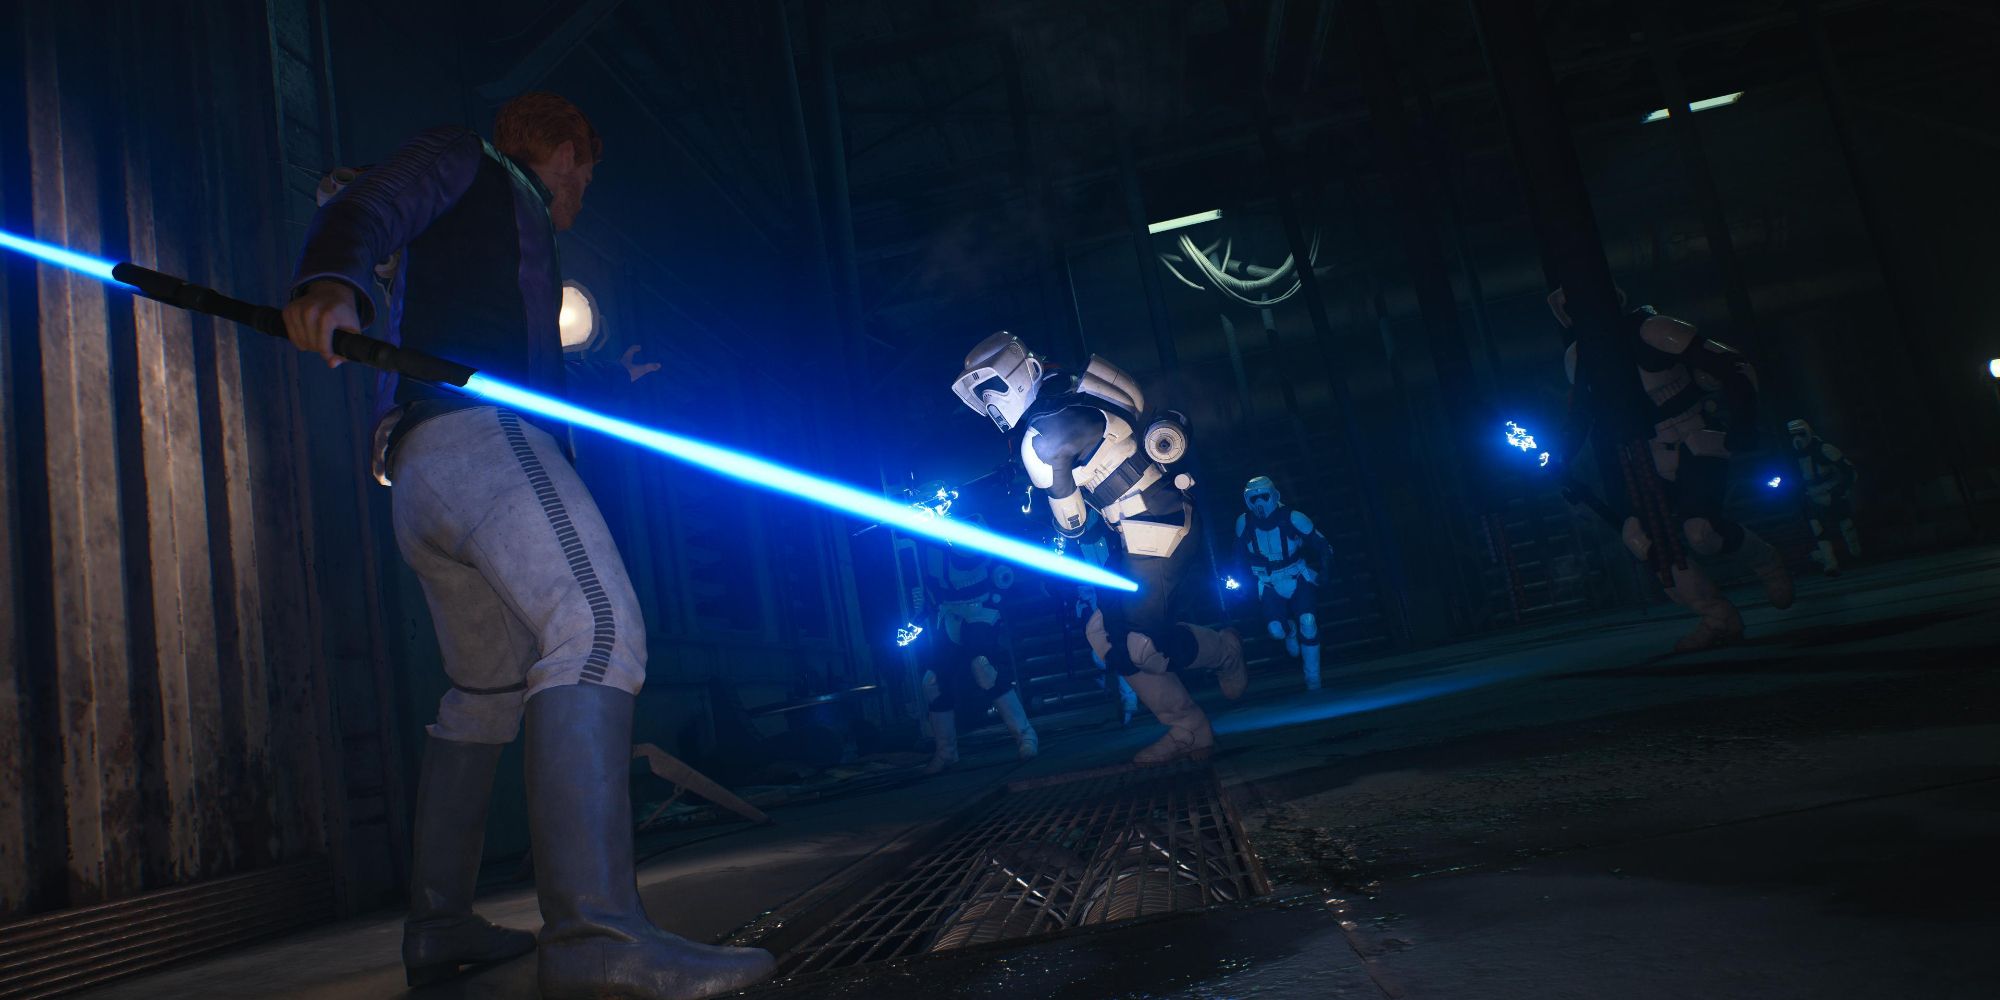 An image of Cal wielding a blue double bladed lightsaber to fight off storm troopers.